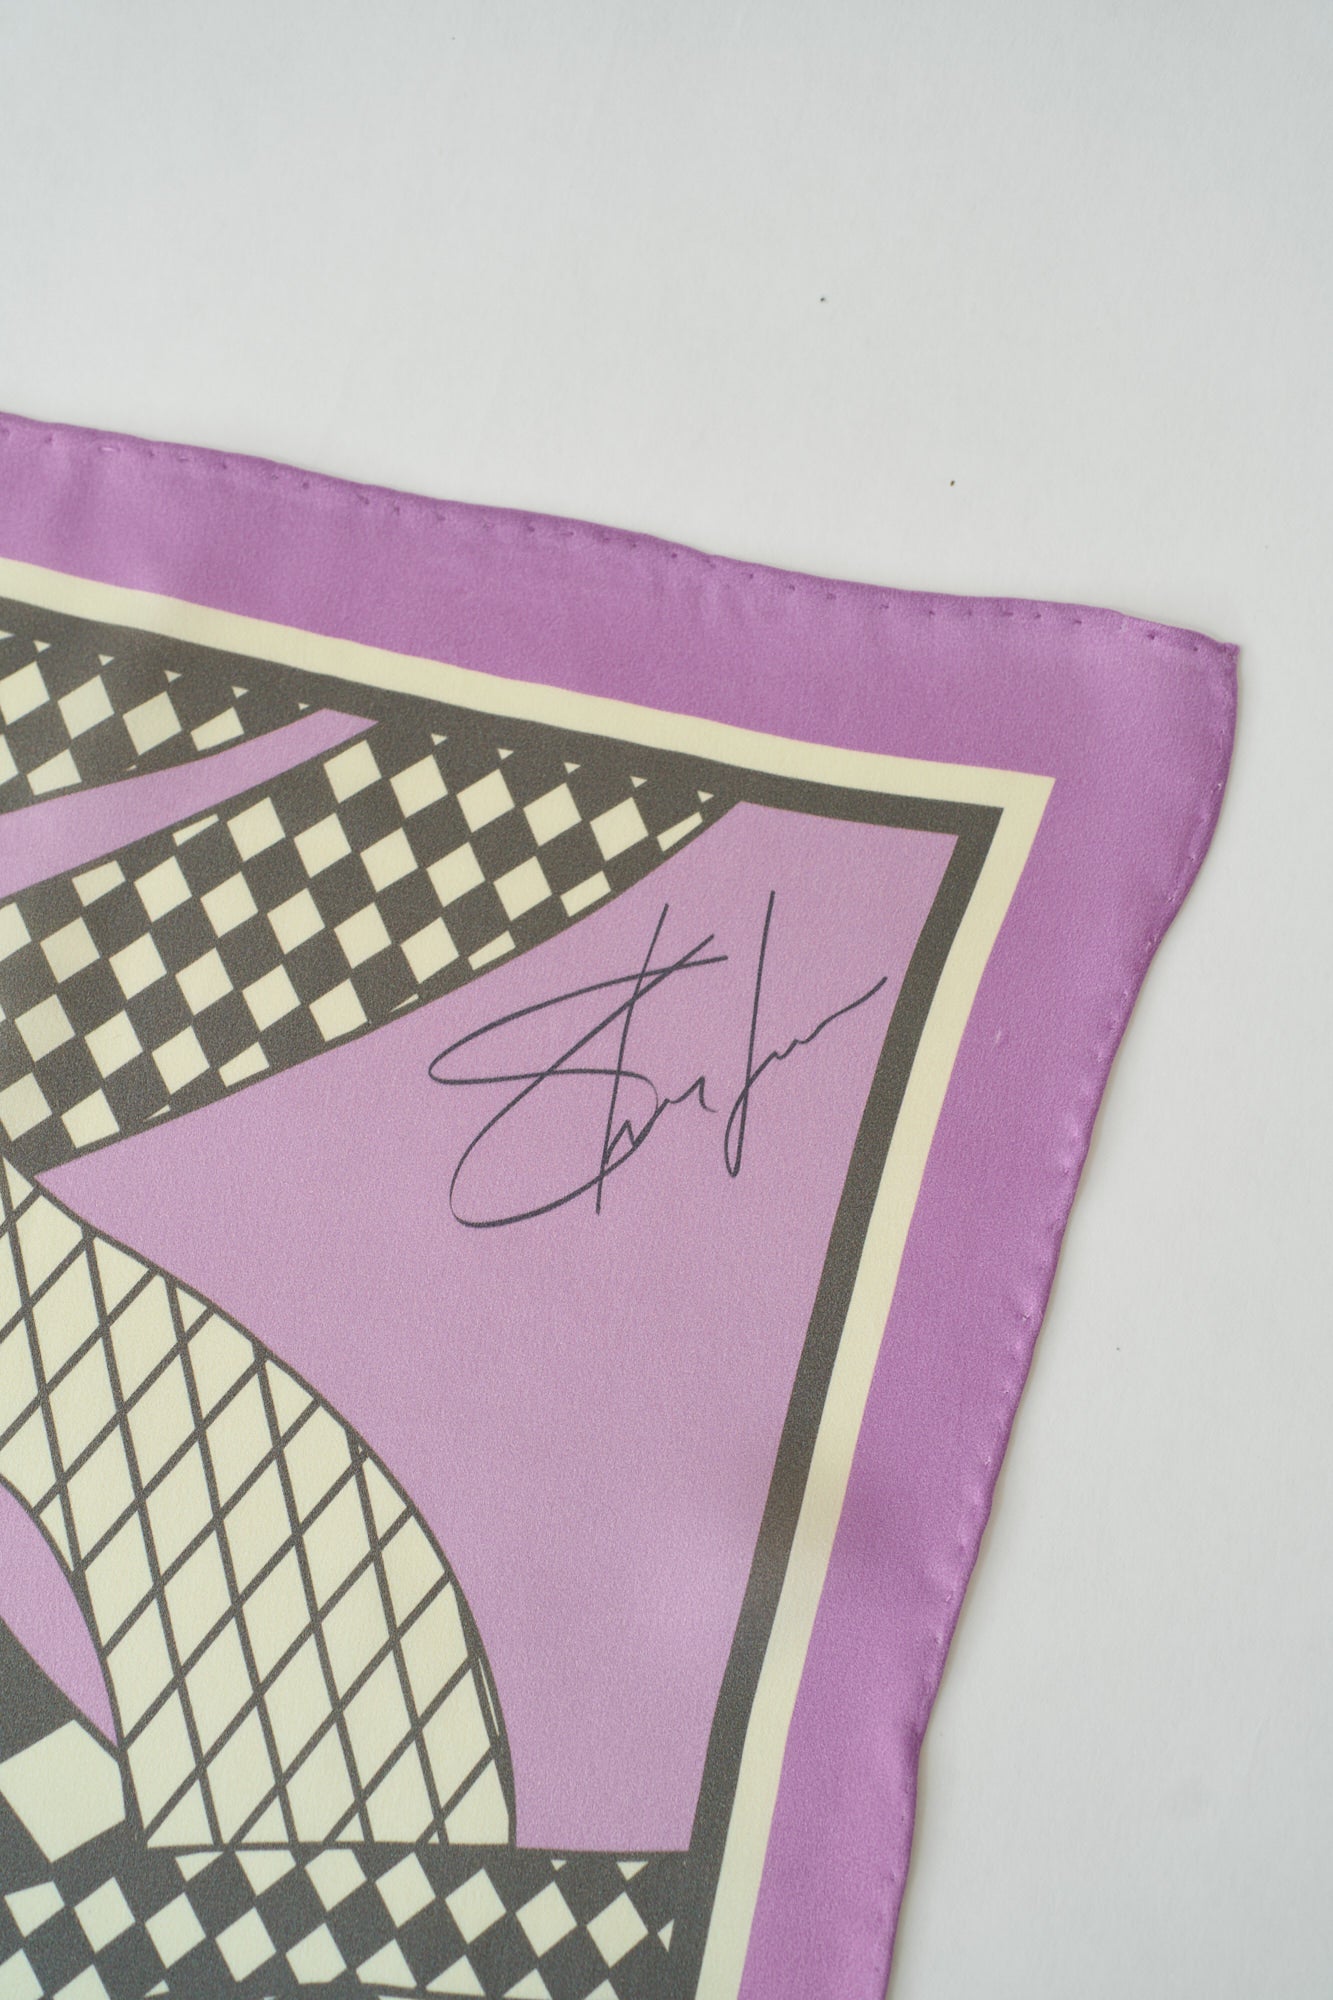 "Journey" Silk Scarf by SHANTALL LACAYO - Lavender Pink - LOST PATTERN Silk Square Scarf